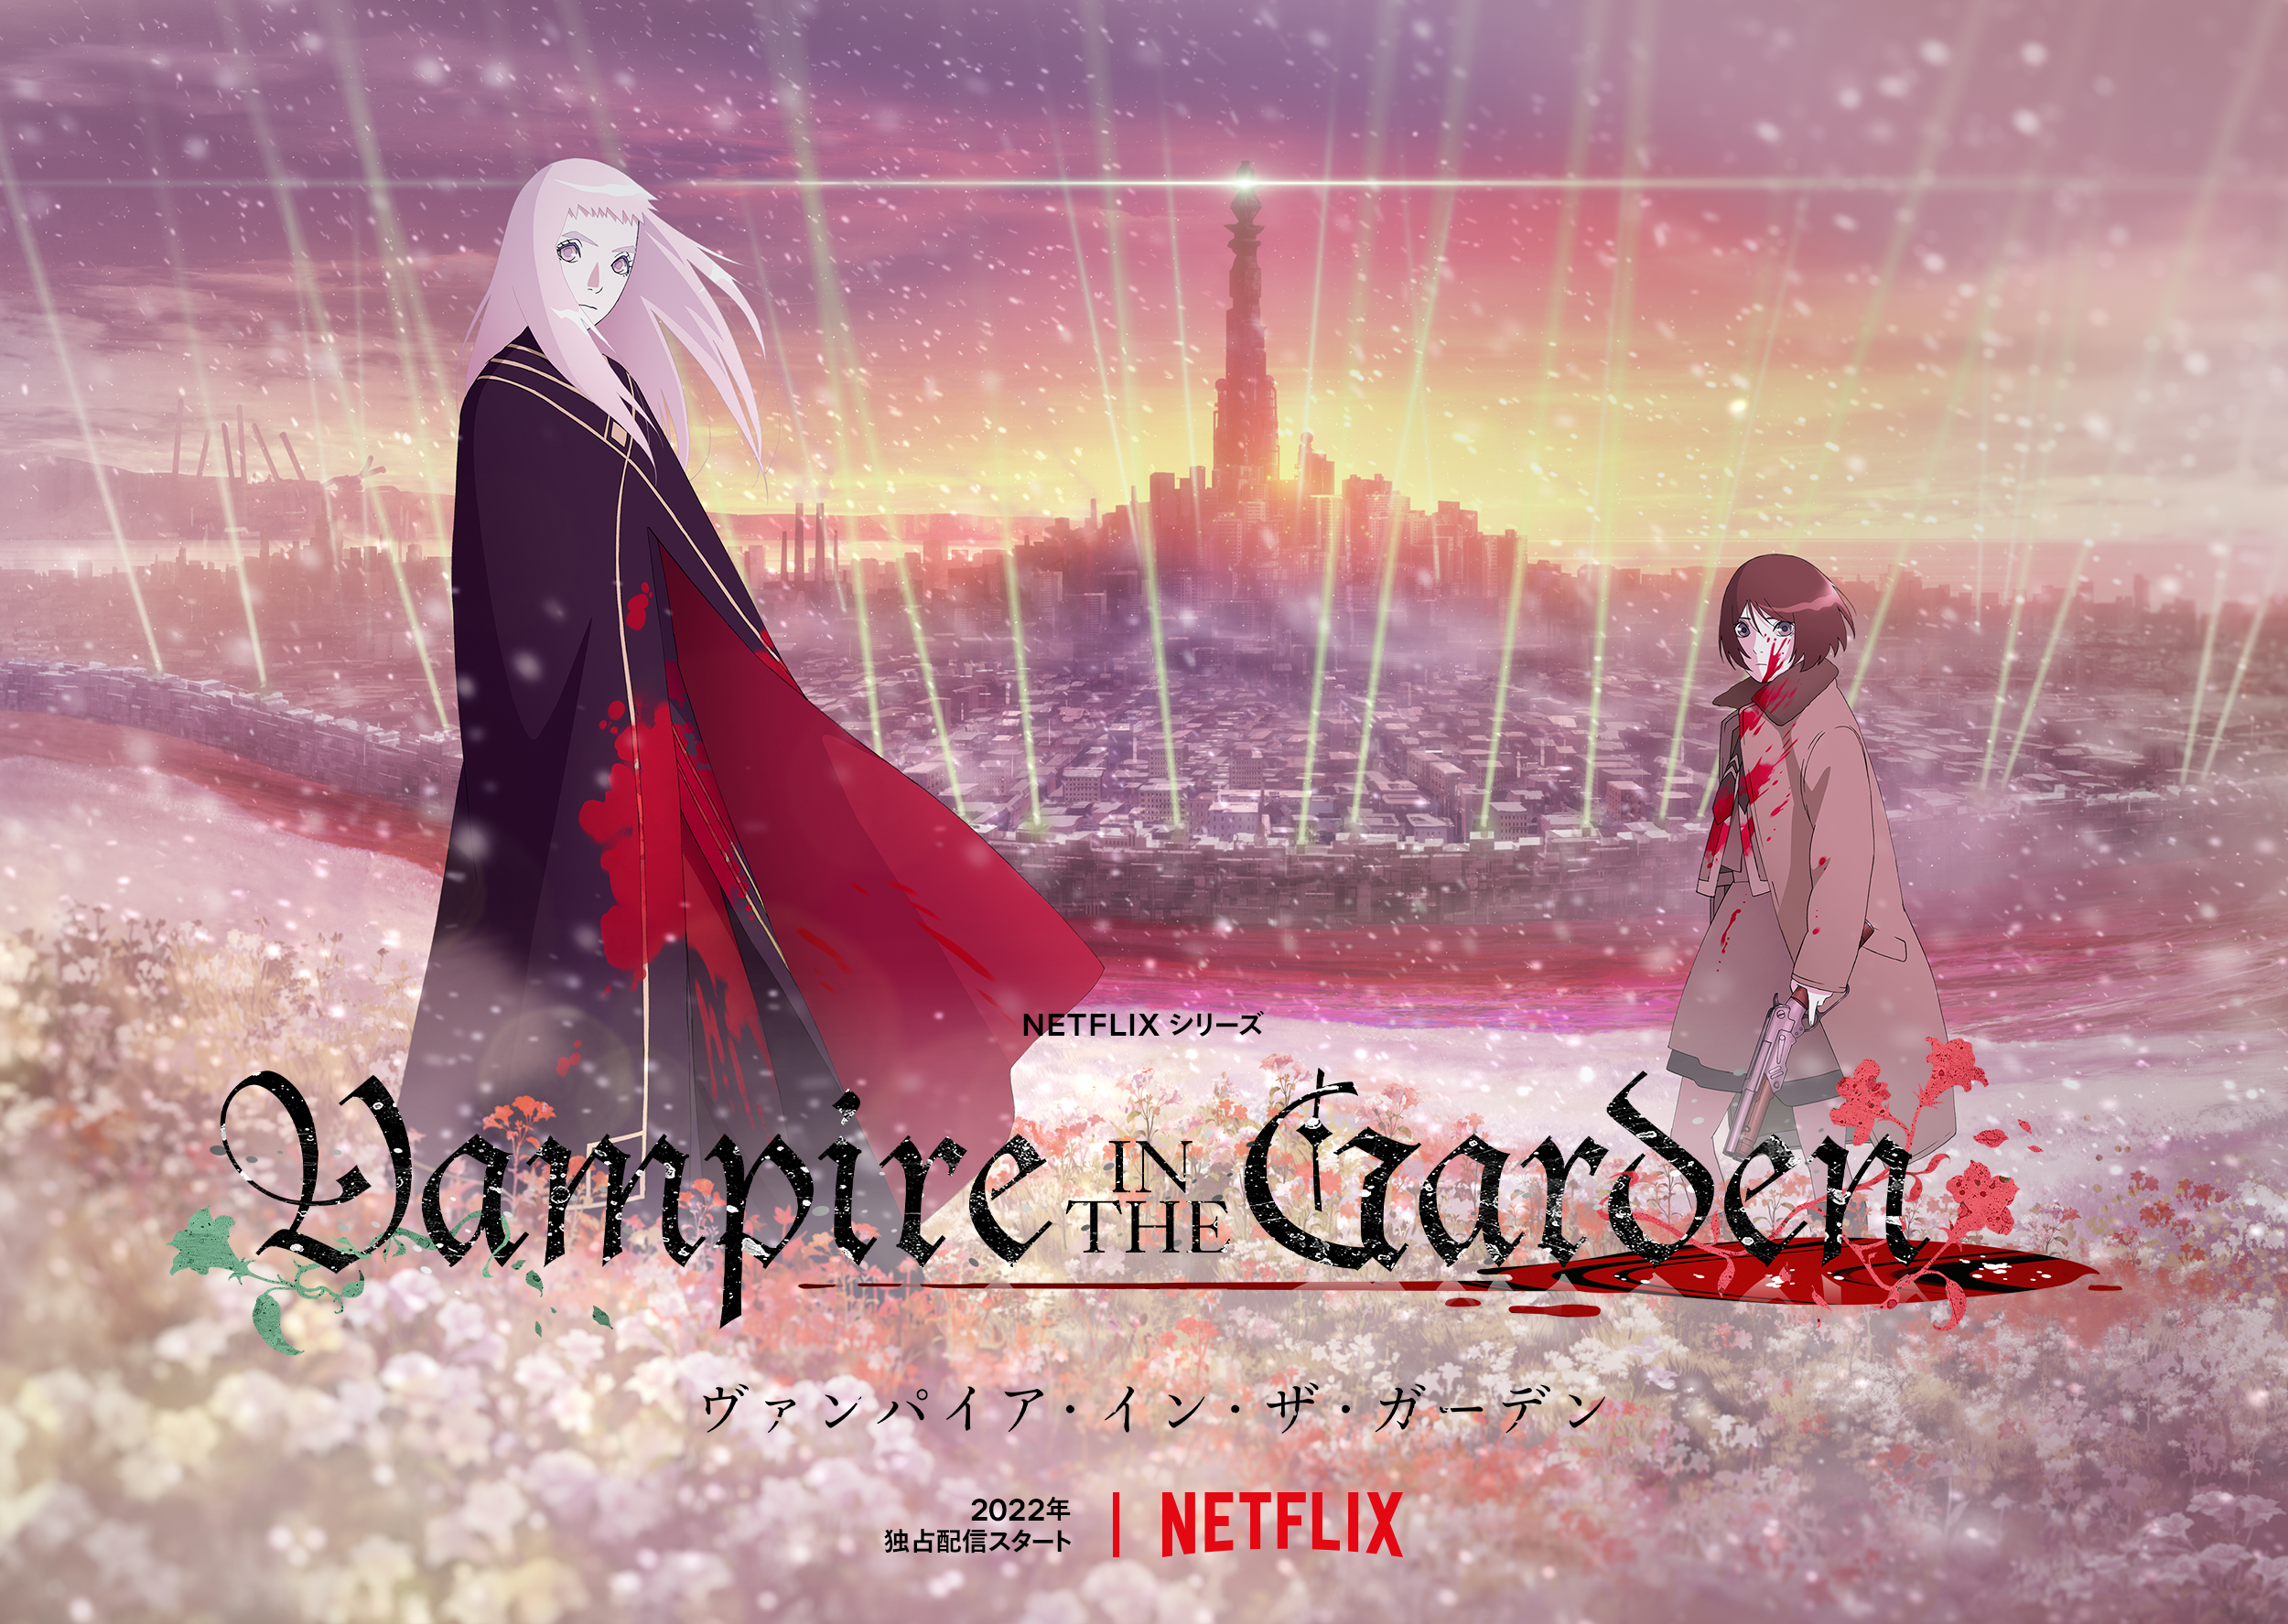 vampire-in-the-garden-kv New Visual and Cast Revealed for "Vampire in the Garden", Coming to Netflix in 2022